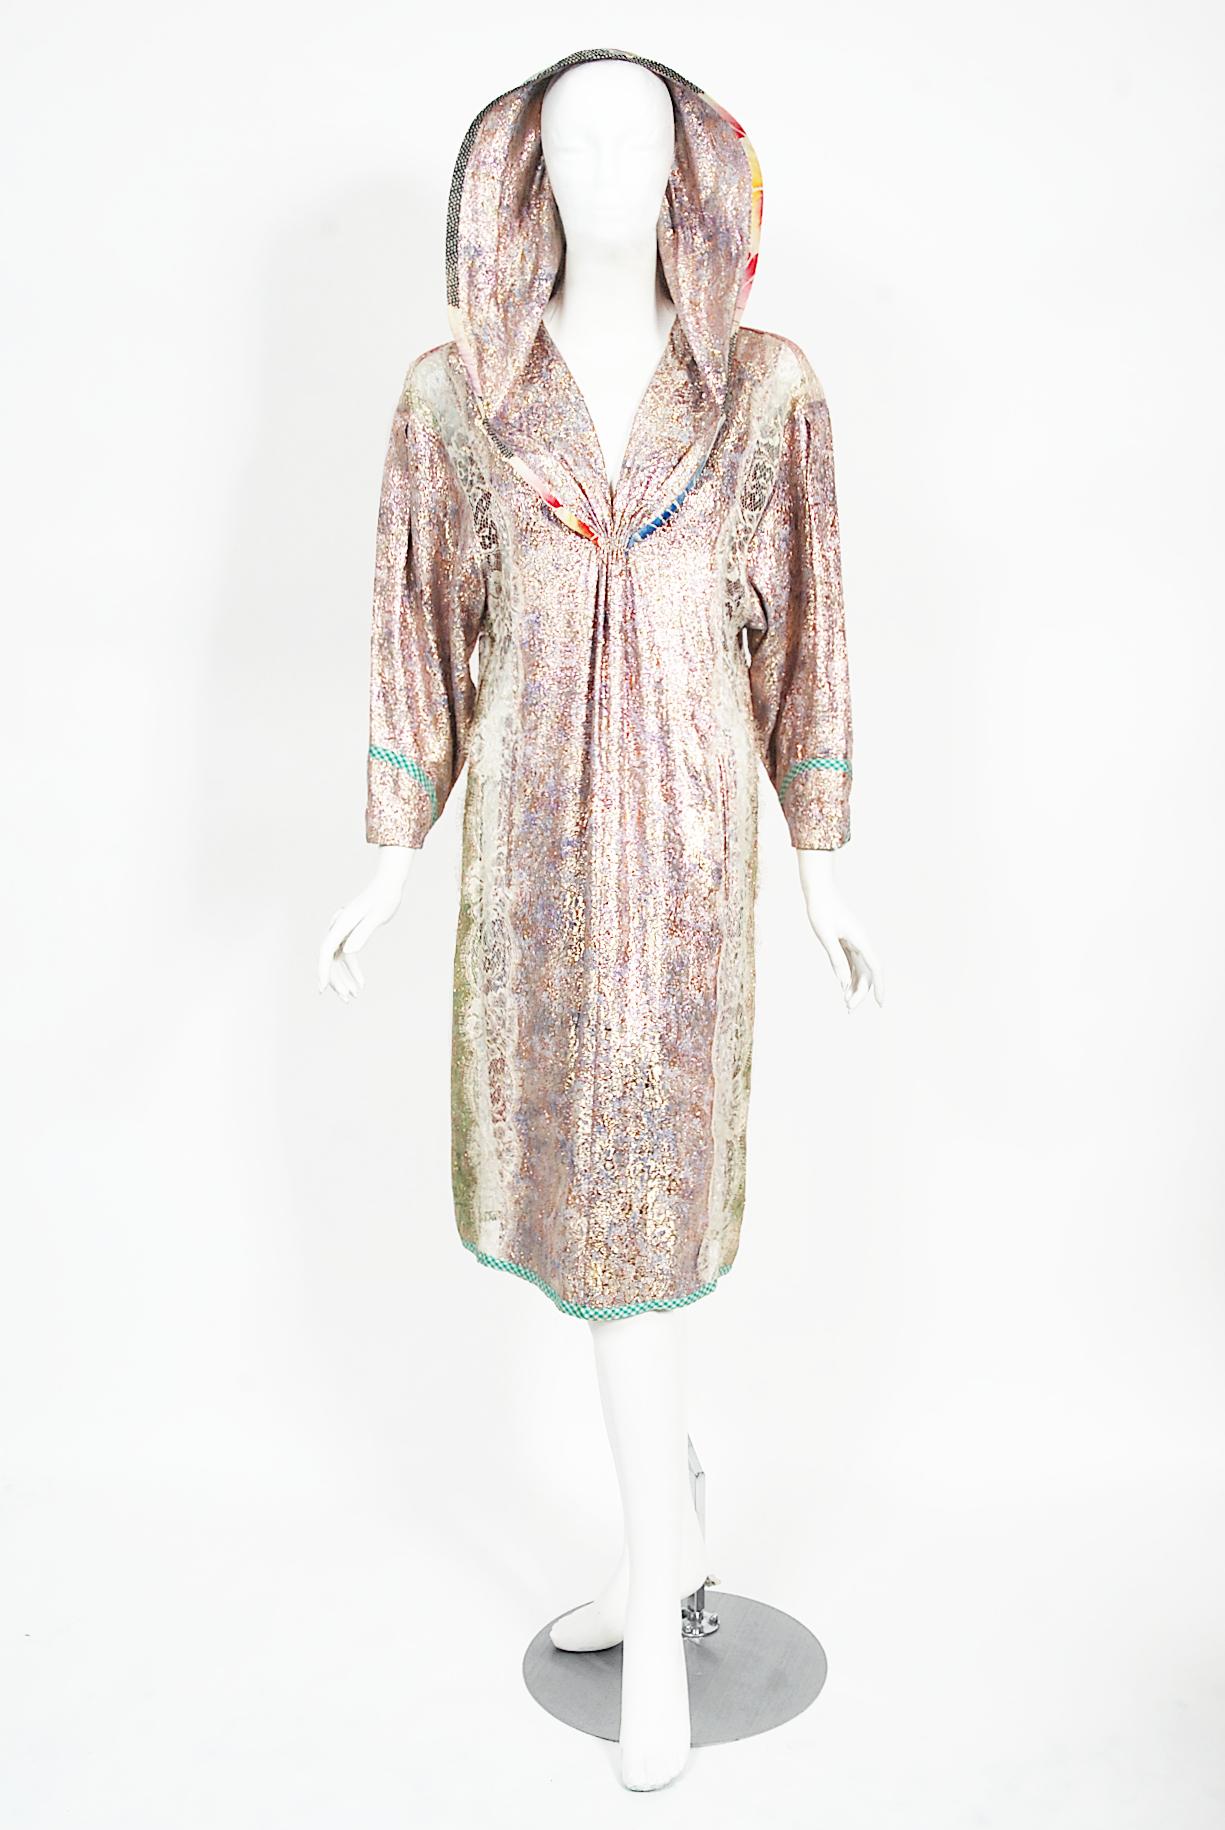 A magical and incredibly rare Koos Van Den Akker couture hooded dress dating back to the mid 1970's. Koos was especially known for the incorporation of collage into his work and he always started a garment from the love of textiles together. This